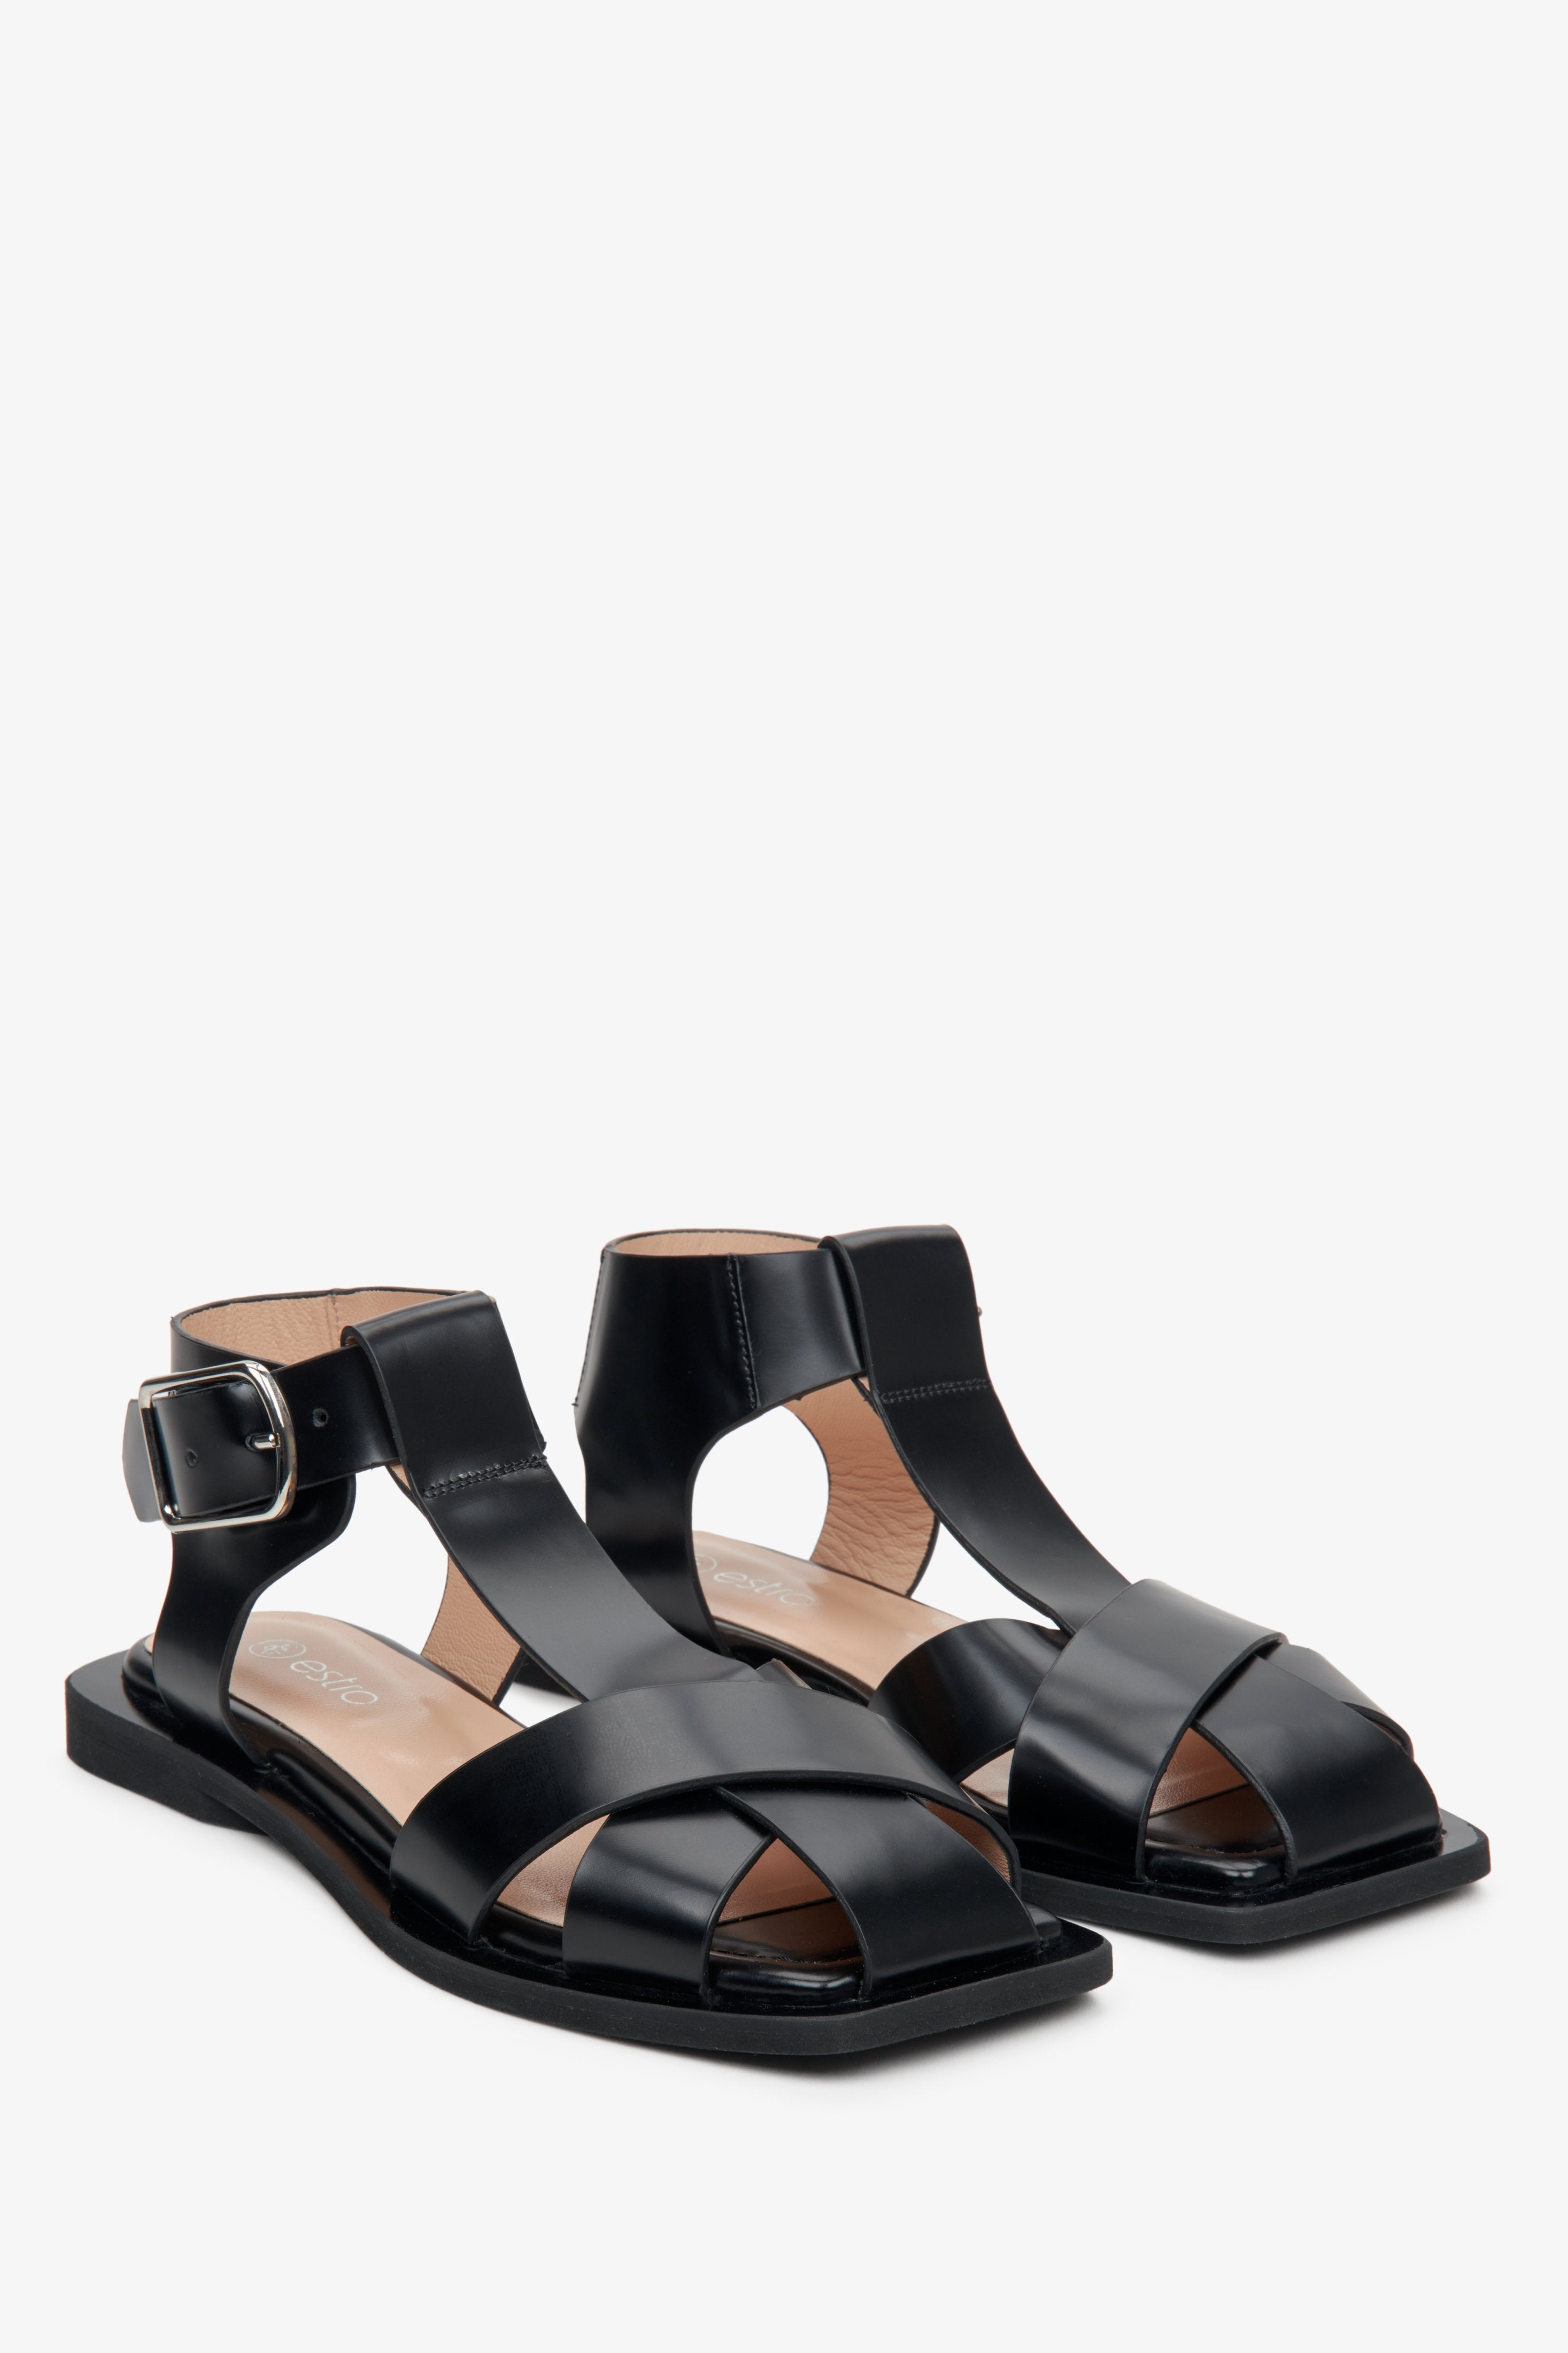 Women's black leather strappy sandals by Estro - presentation of the top of the shoe and the side seam.